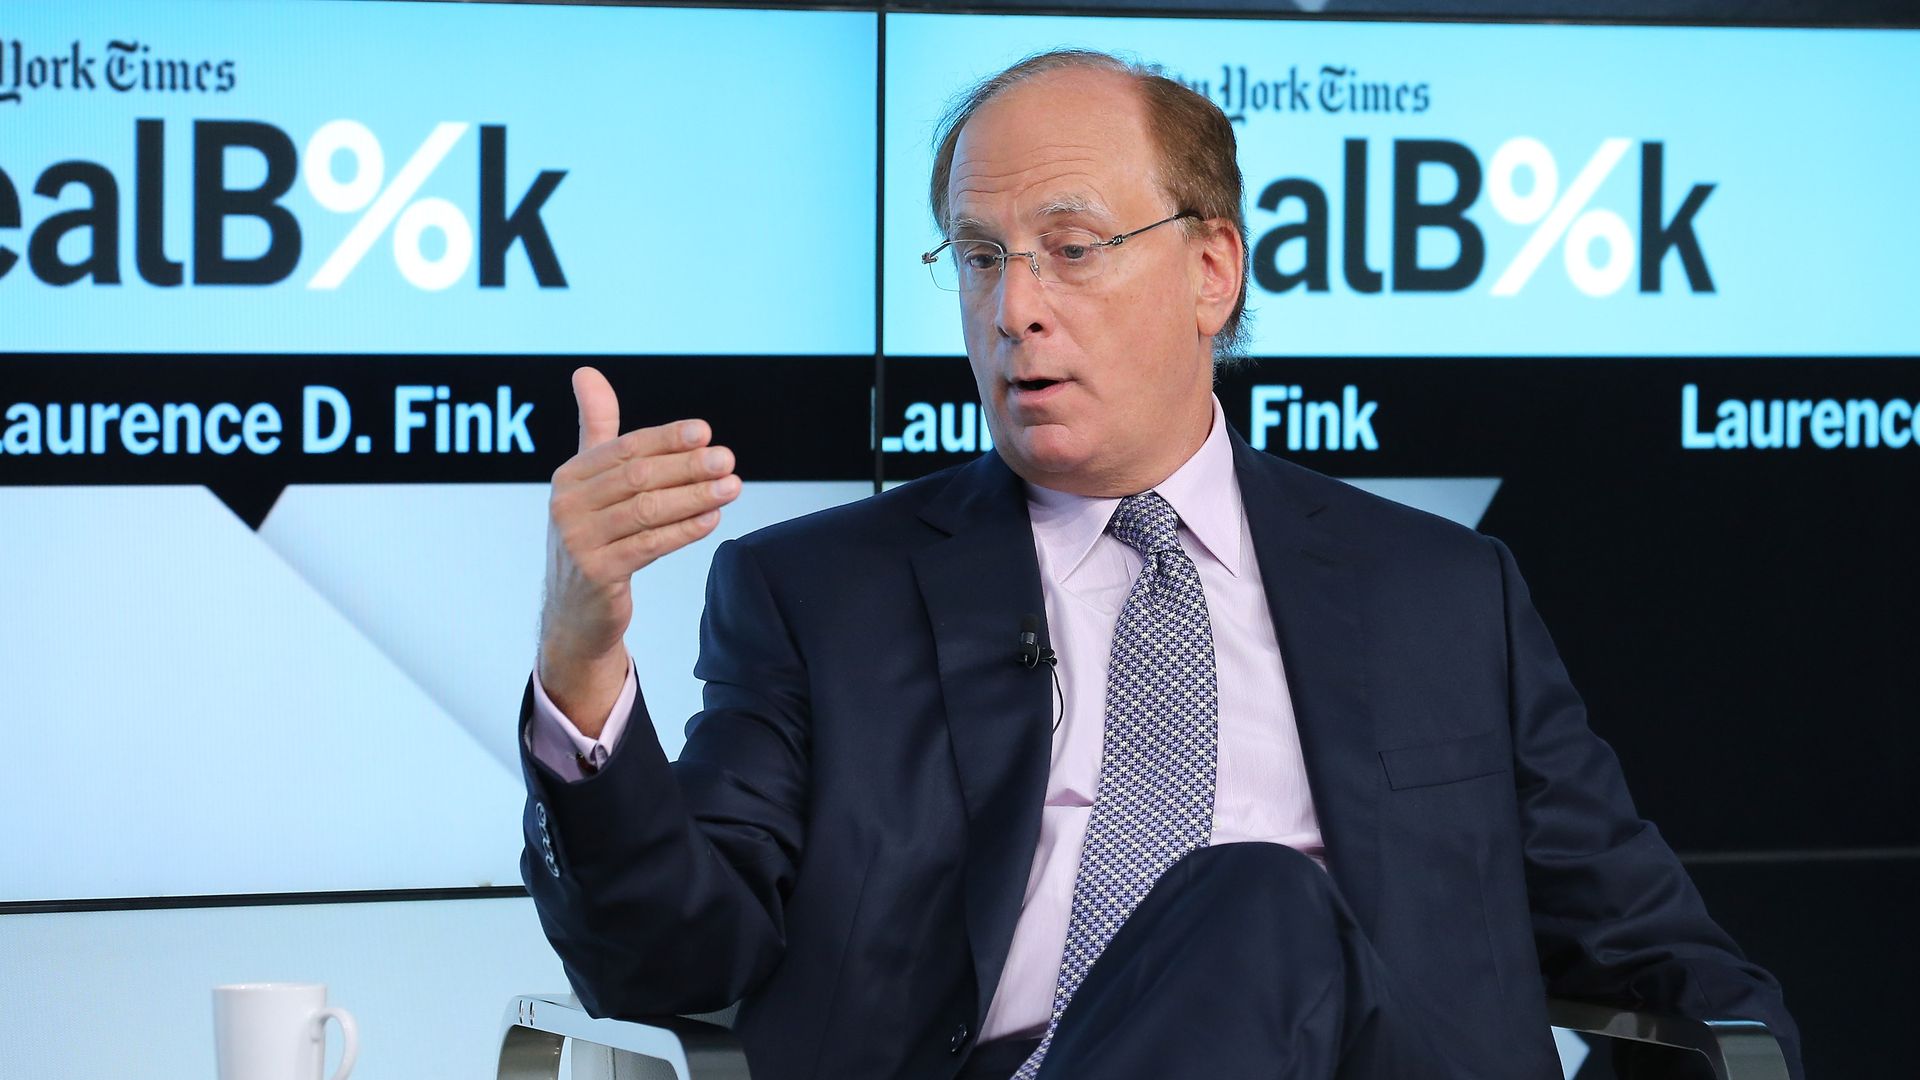 Larry Fink at New York Times Dealbook Conference